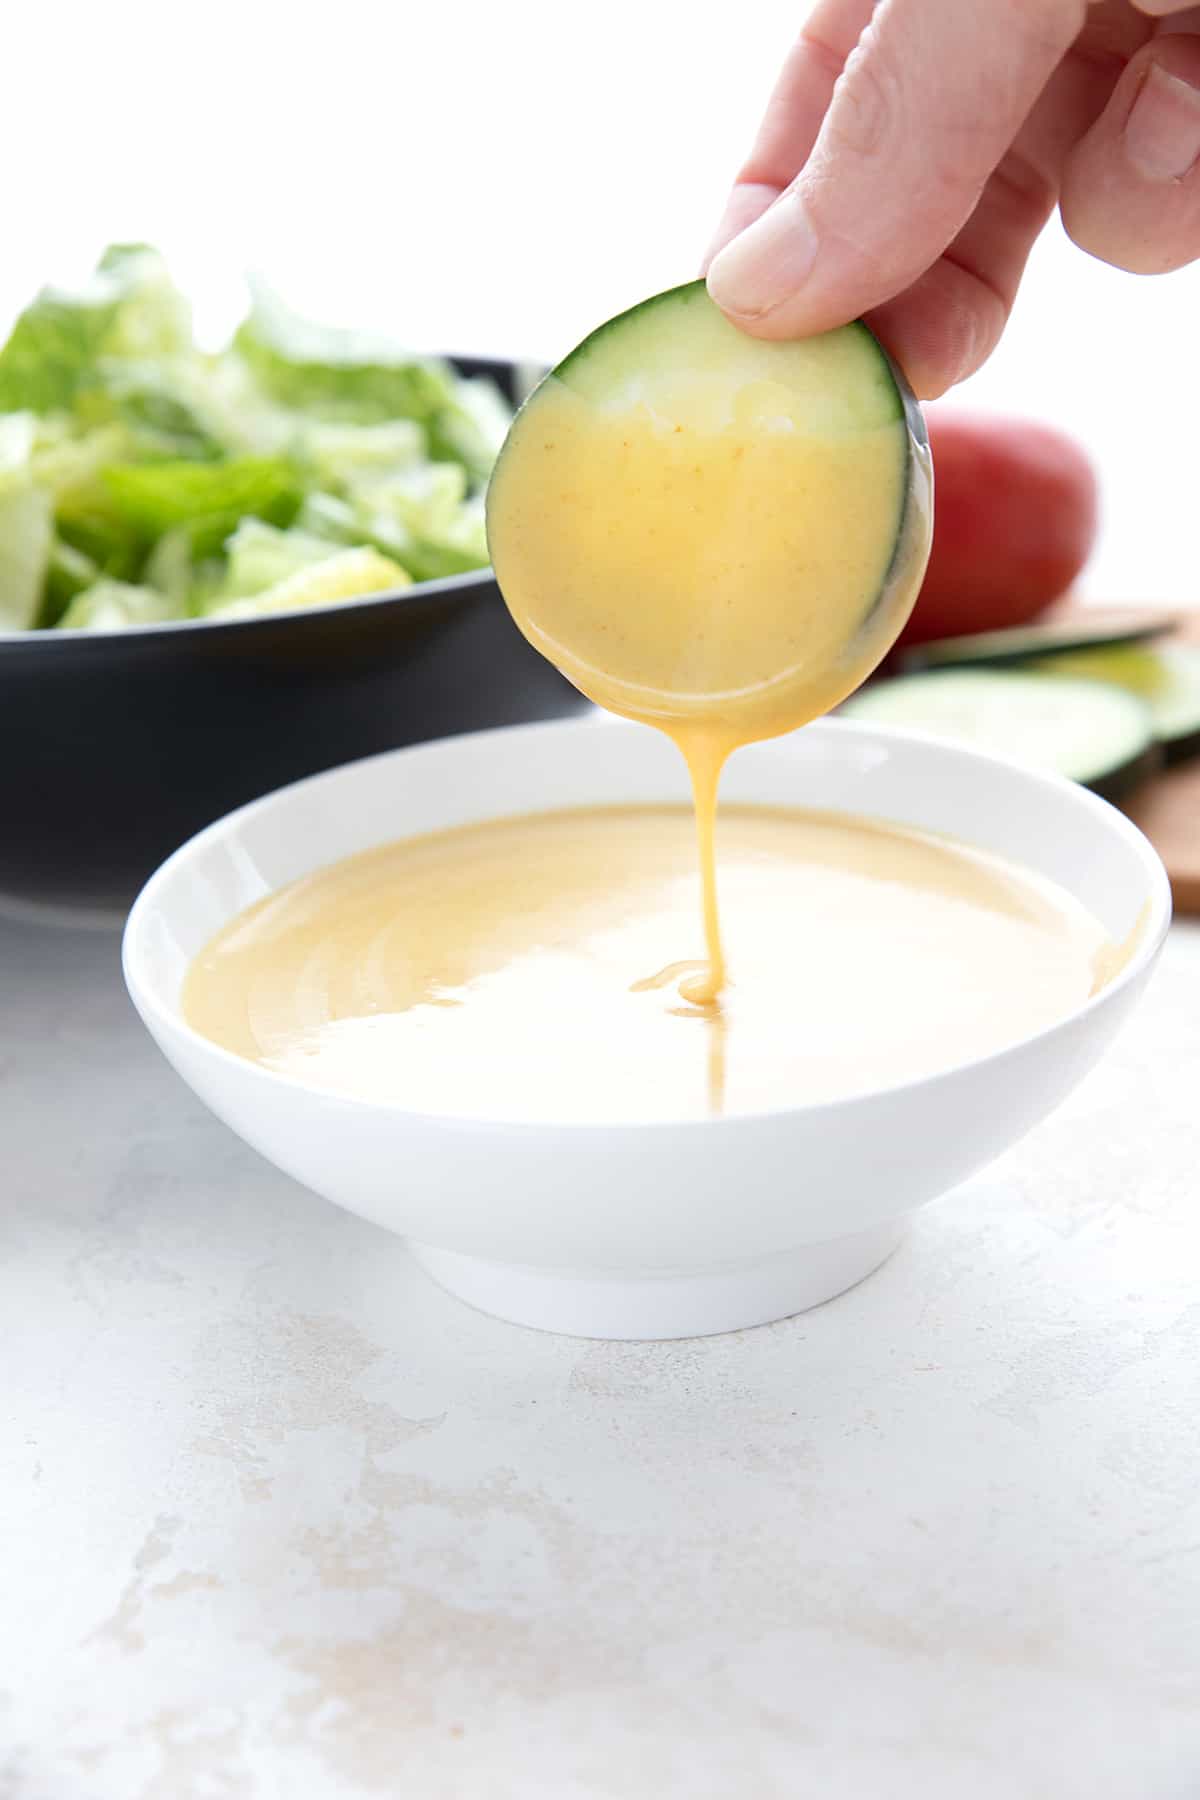 A slice of cucumber being dipped into honey mustard sauce in a white bowl.